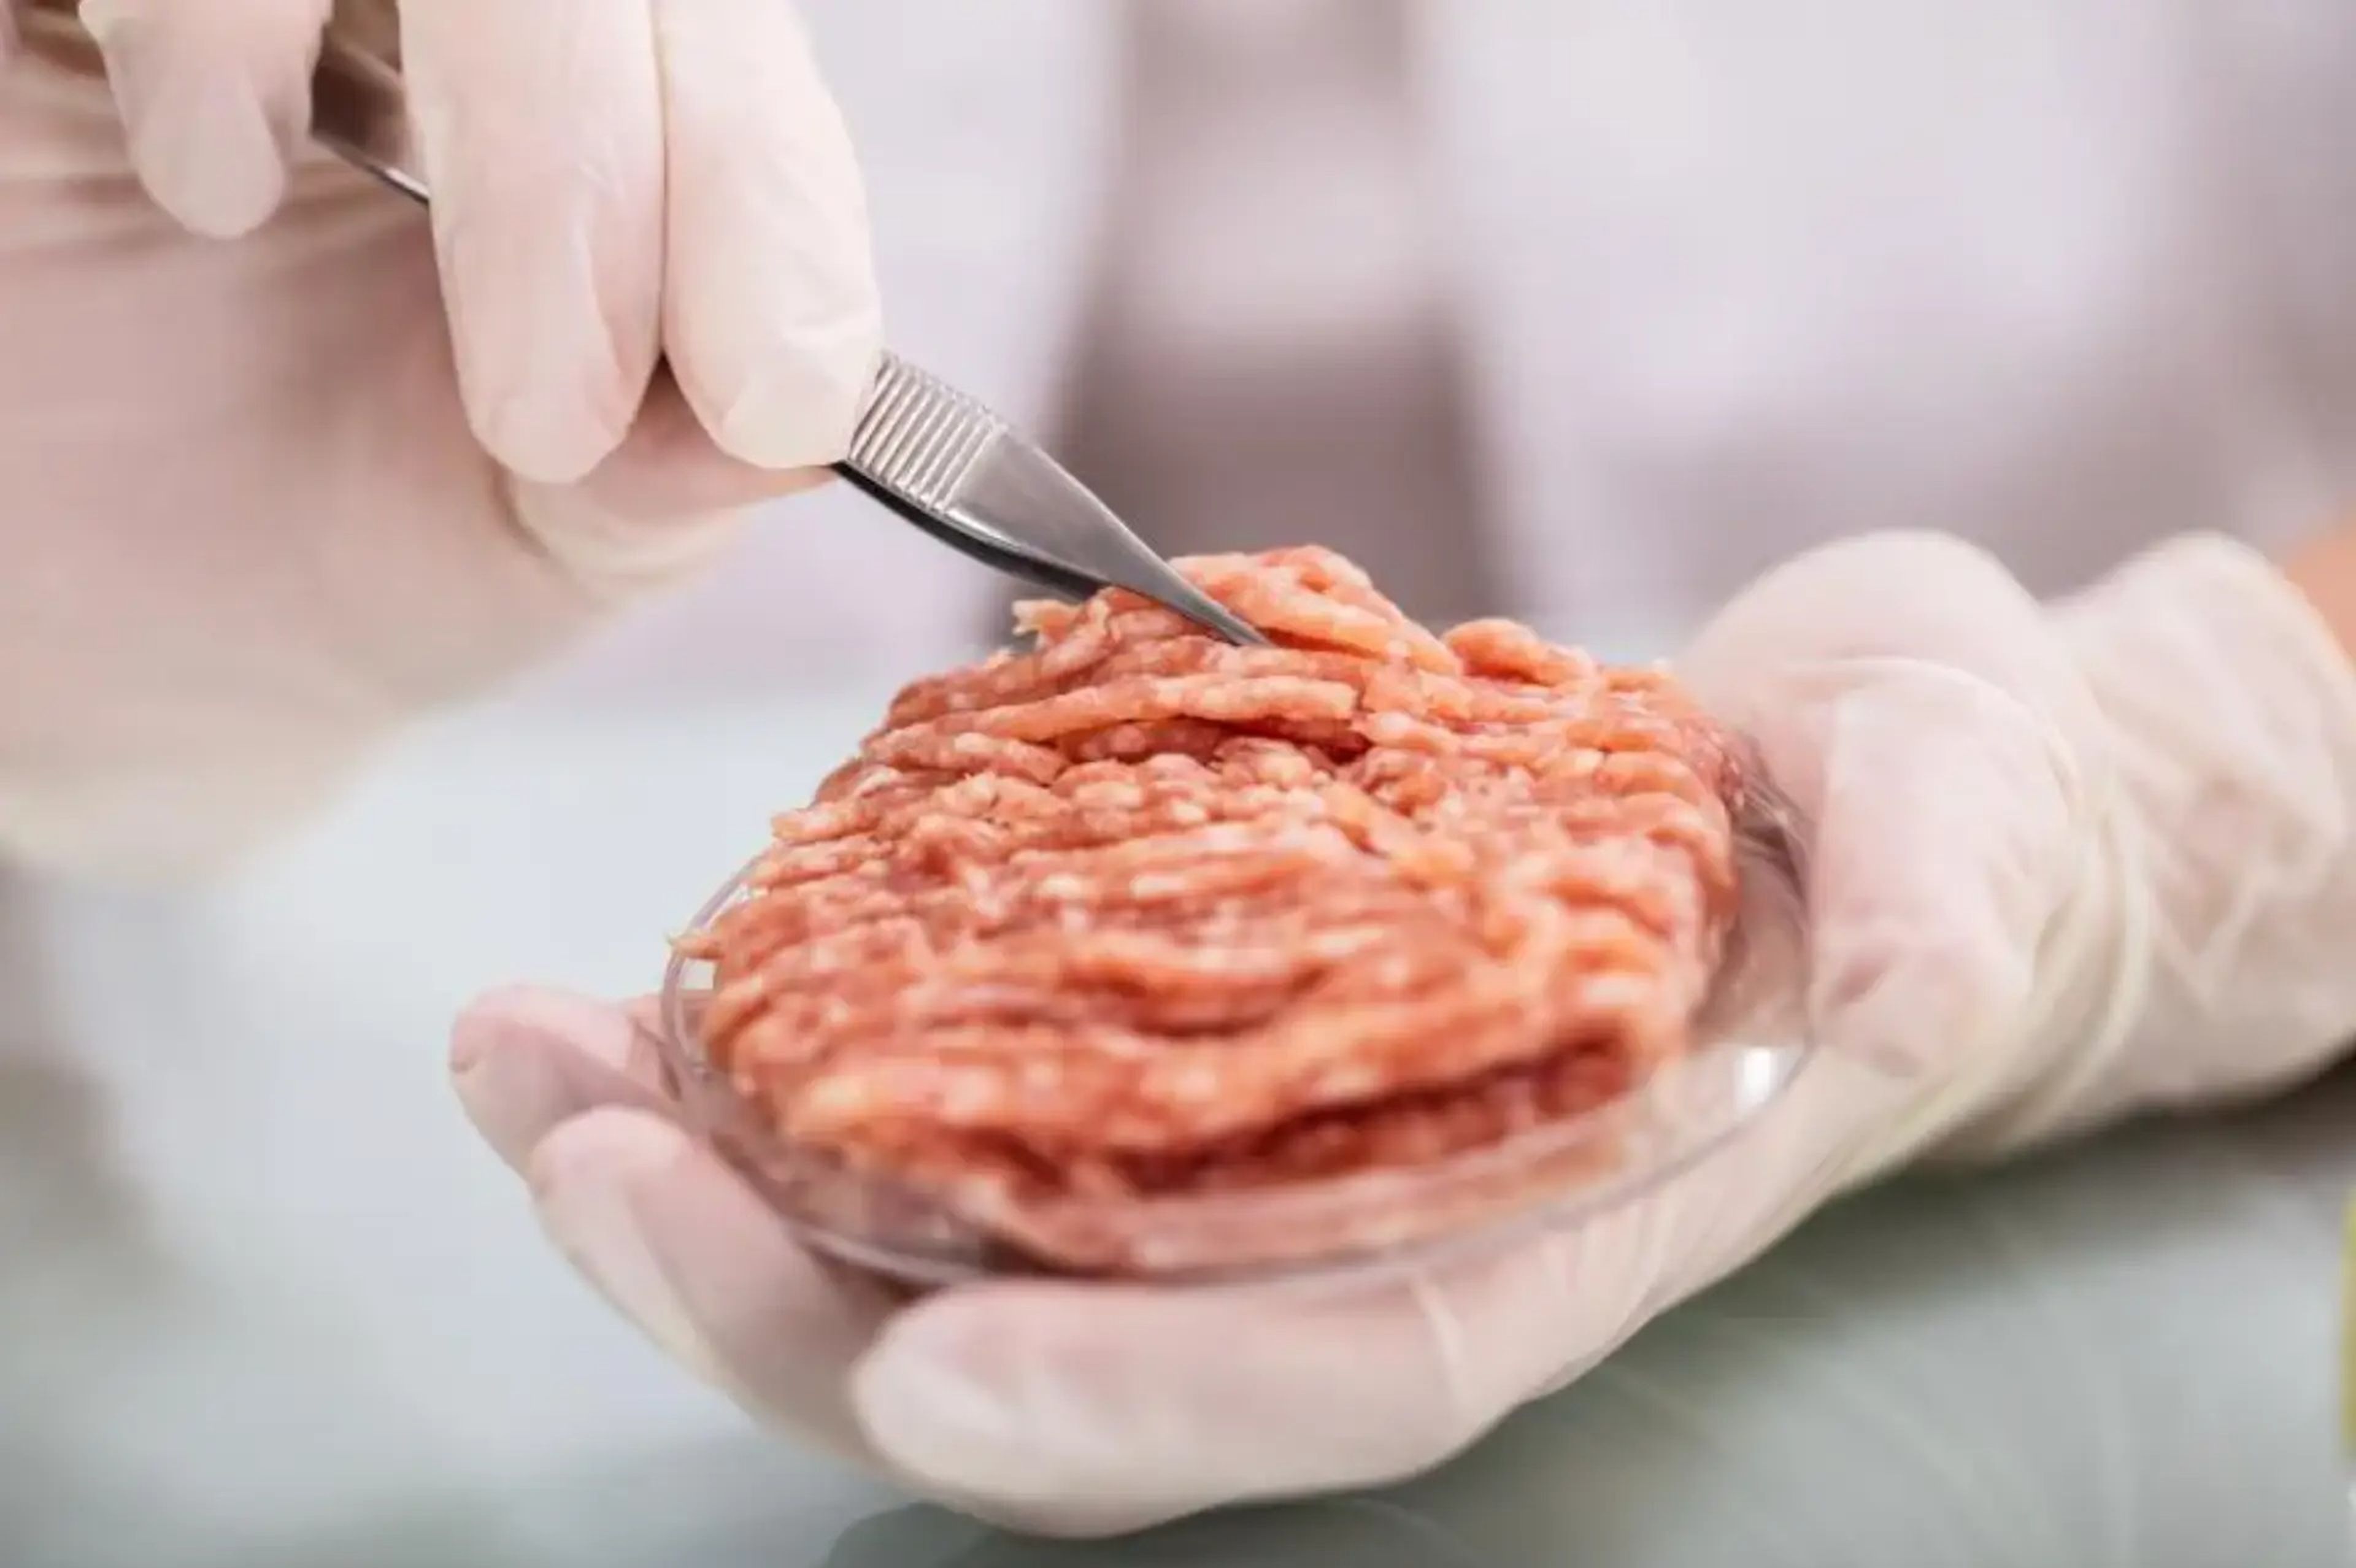 Lab-grown meat could one day be used to feed astronauts on deep space missions.